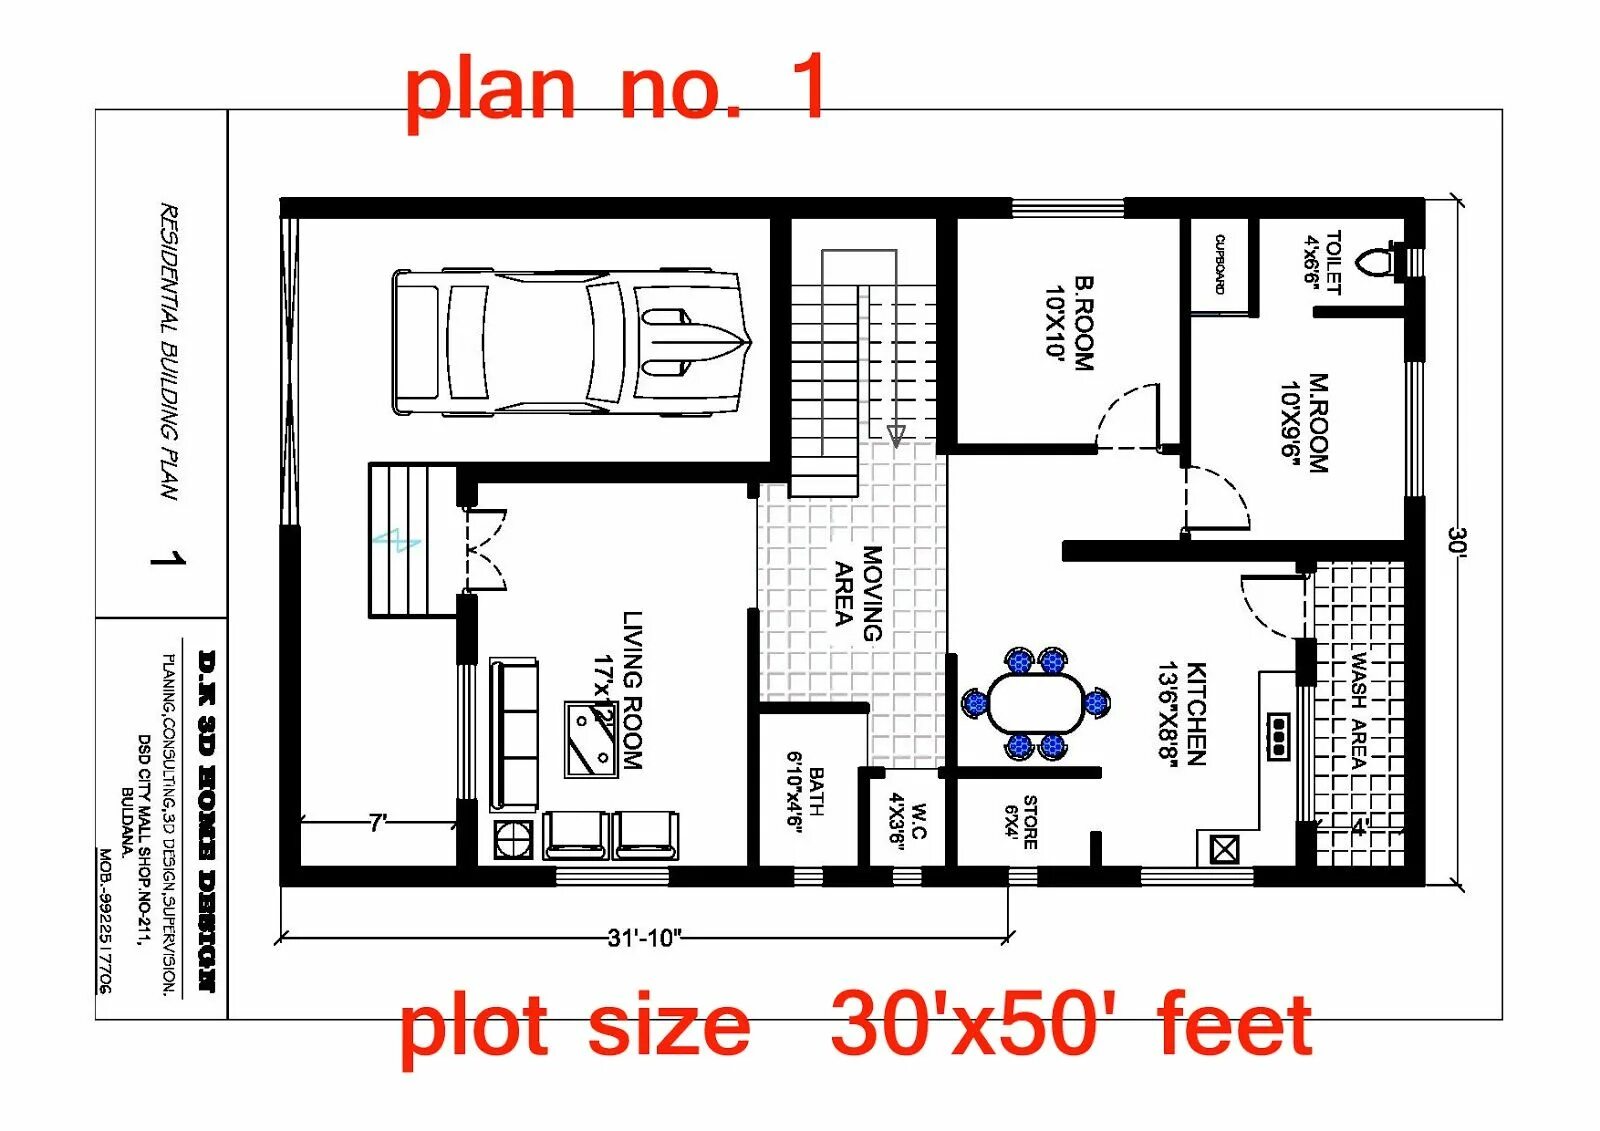 Plan 50. Home Plan 50. Home with Plan. 30 By 10 House Plan. 60*50 Feet House Plan.